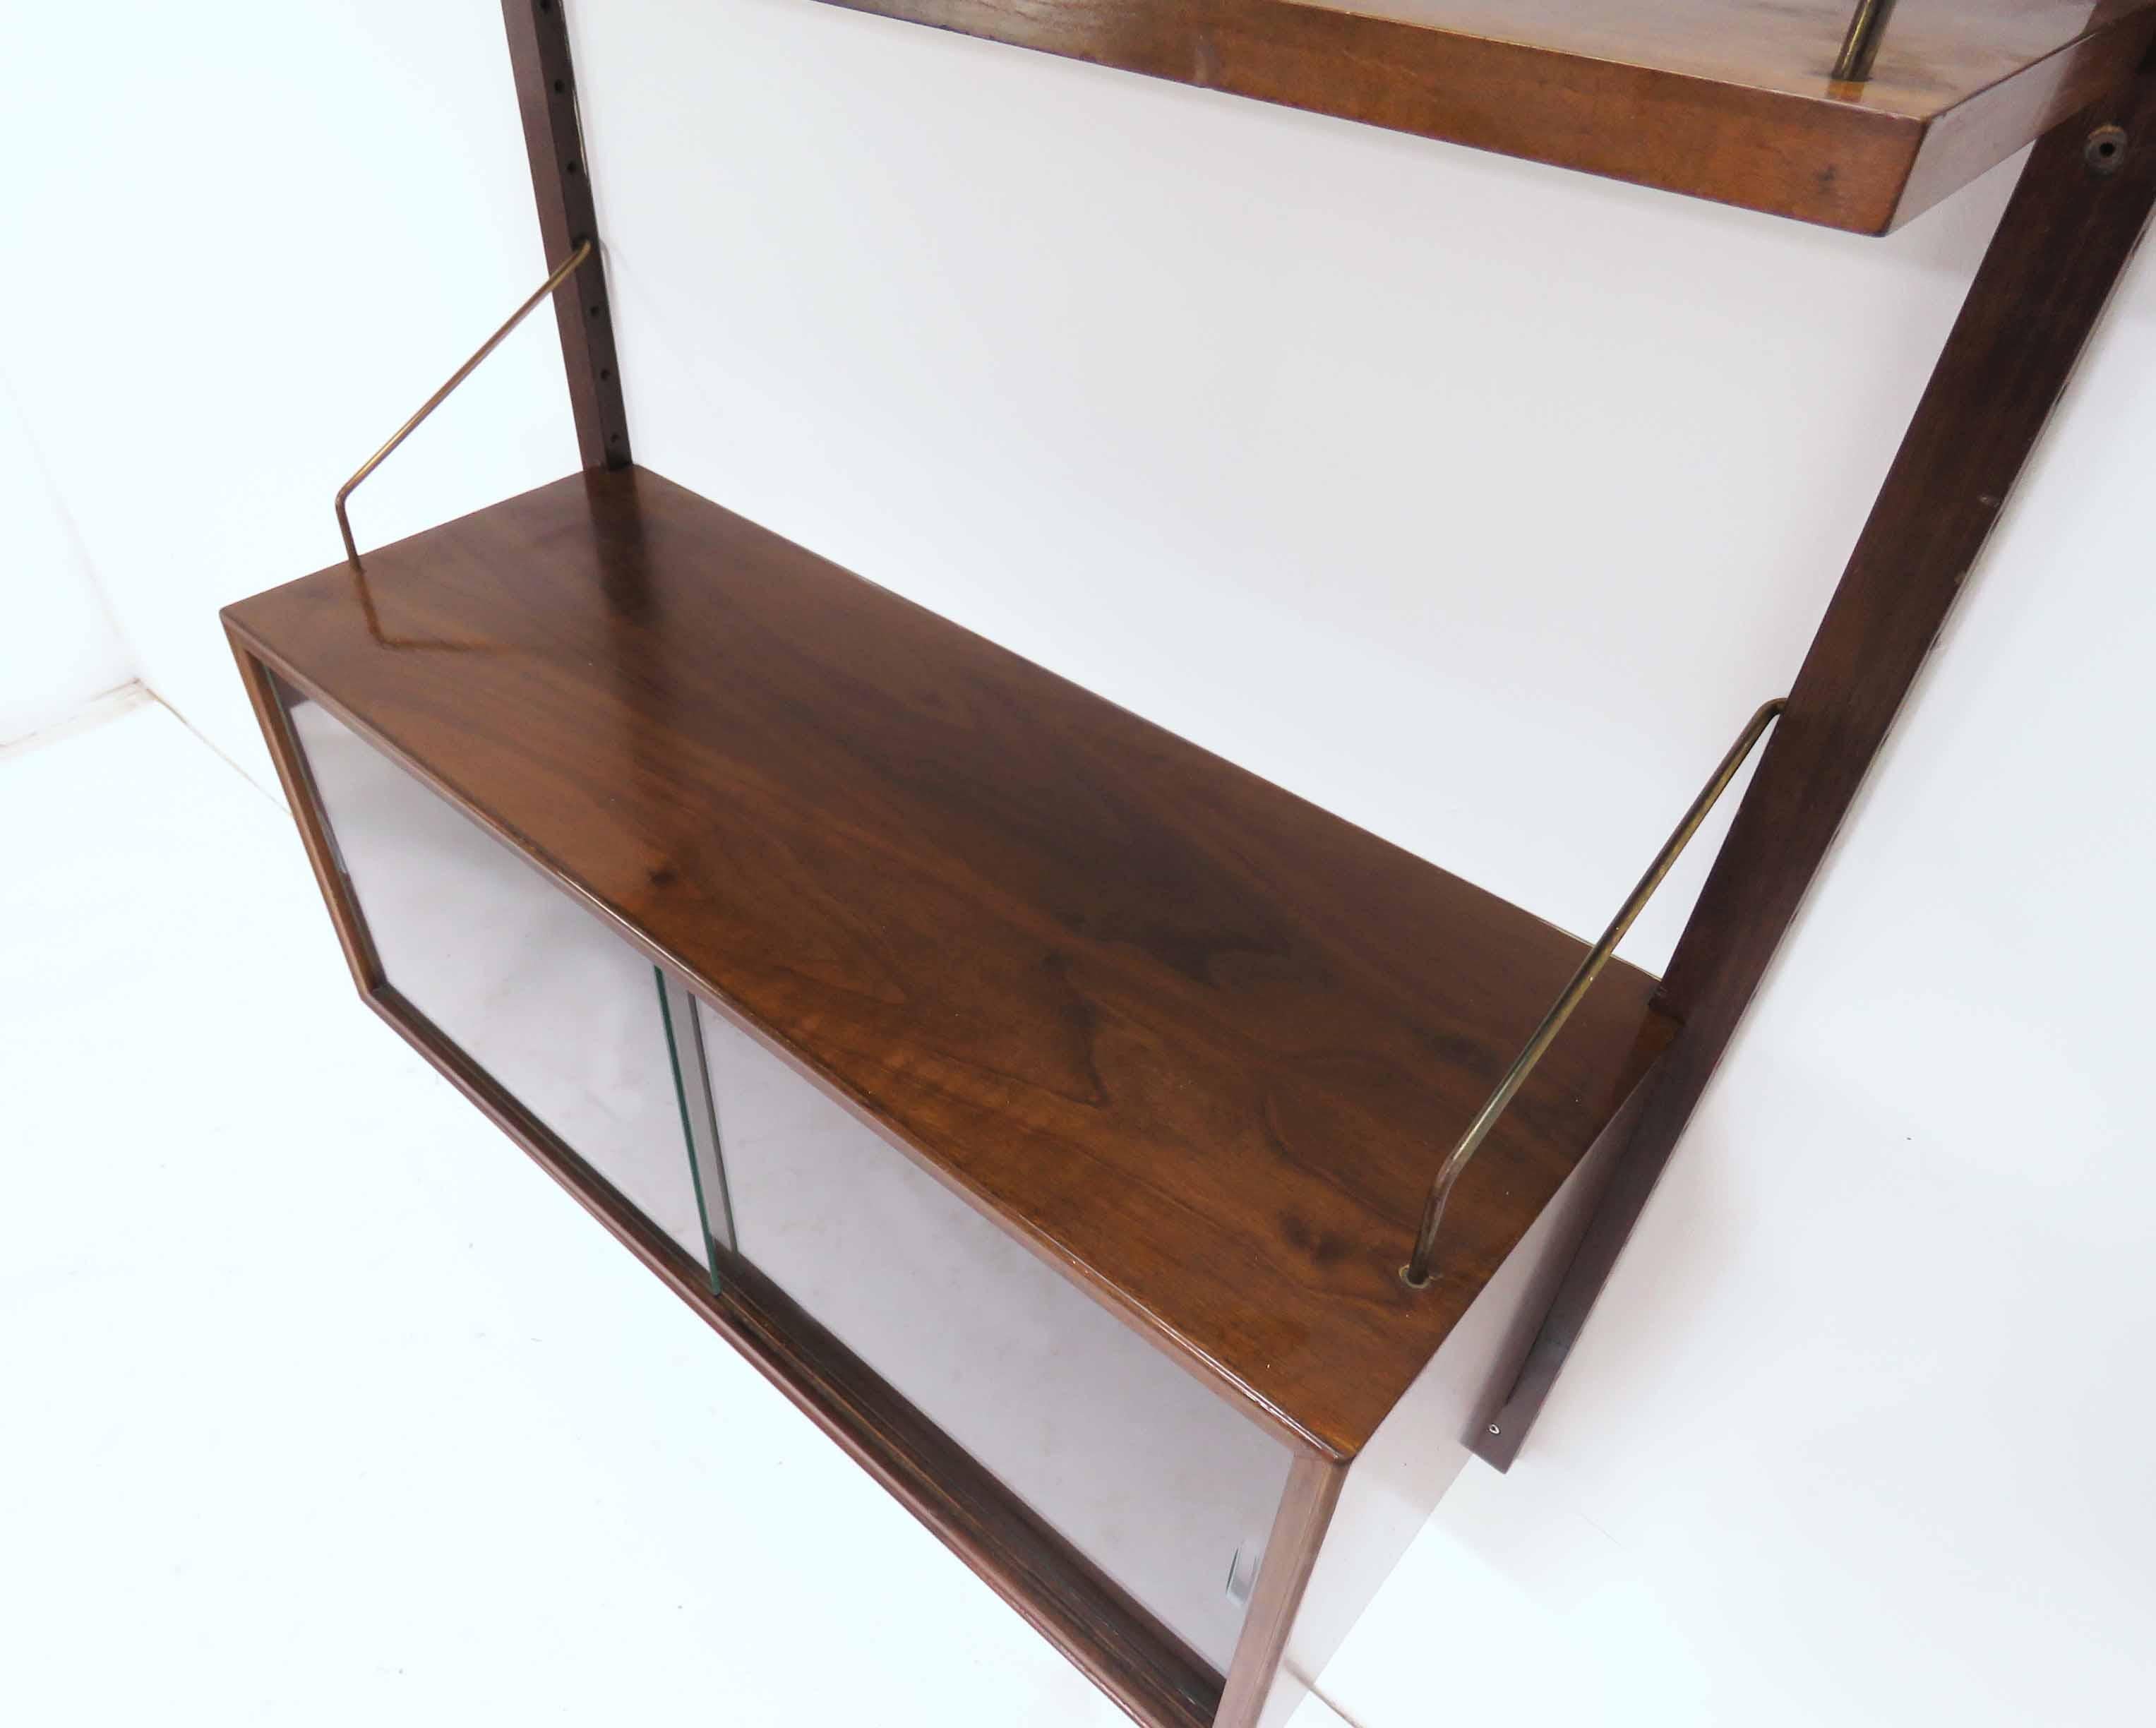 Rosewood single bay wall-mounted Royal System shelving unit, by Poul Cadovius, Denmark, circa 1960s. Consists of a single cabinet with glass doors (and interior glass shelf), and two adjustable rosewood shelves, one 7 7/8